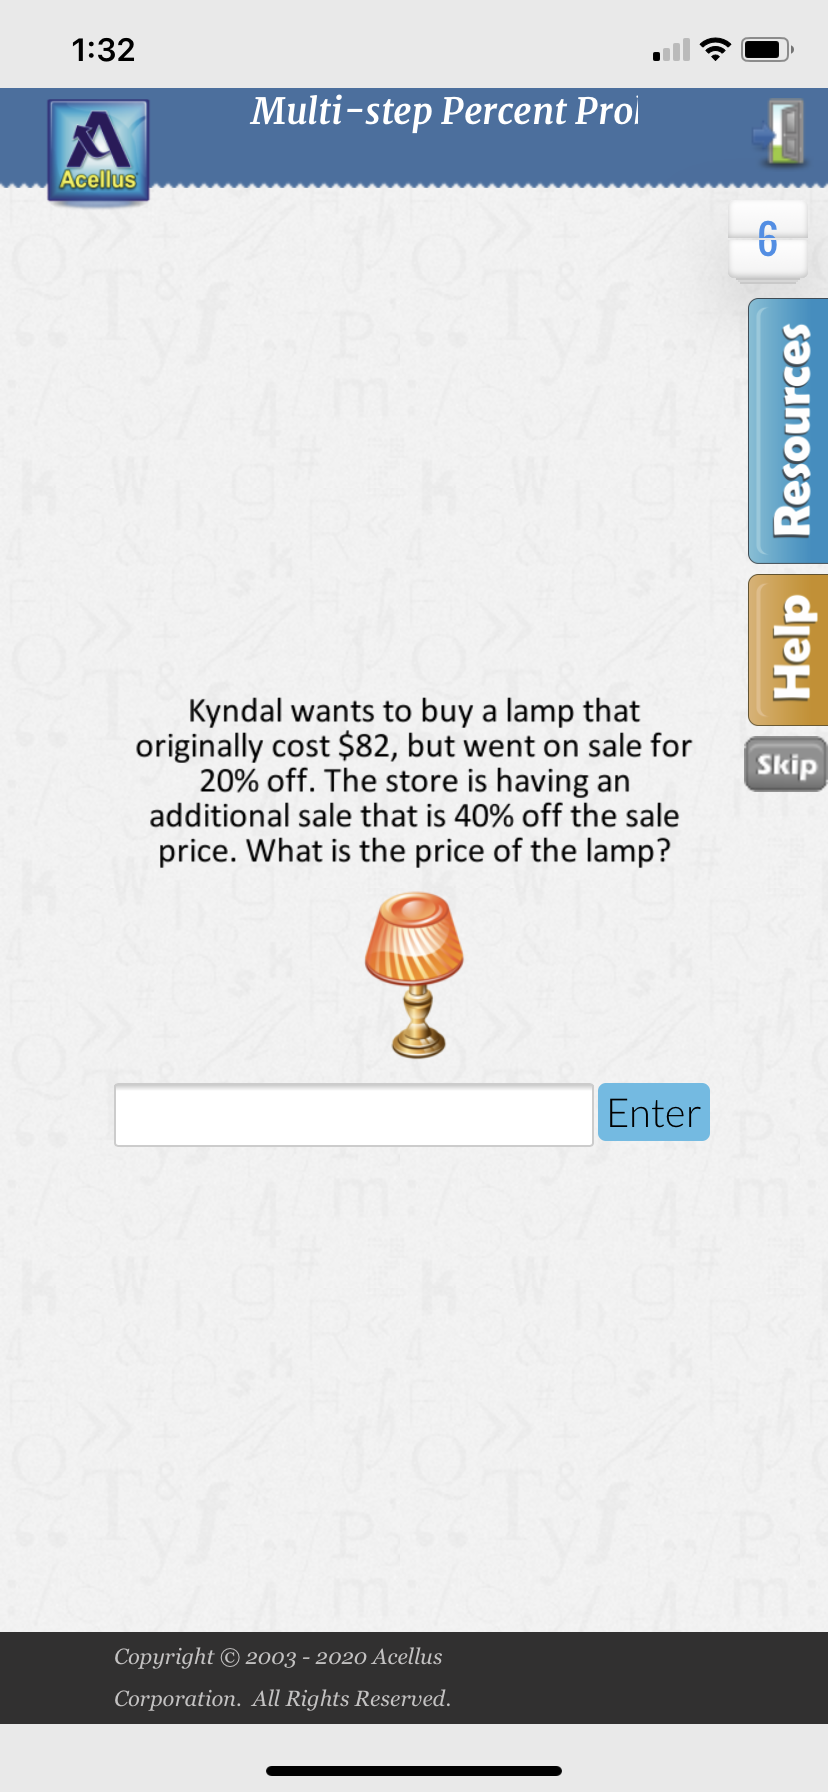 7-step
rcent PPO|
nts to buy a lamp that
$82, but went on sale for
The store is having an
le that is 40% off the sale
is the price of the lamp?
Skip
Help Resources
